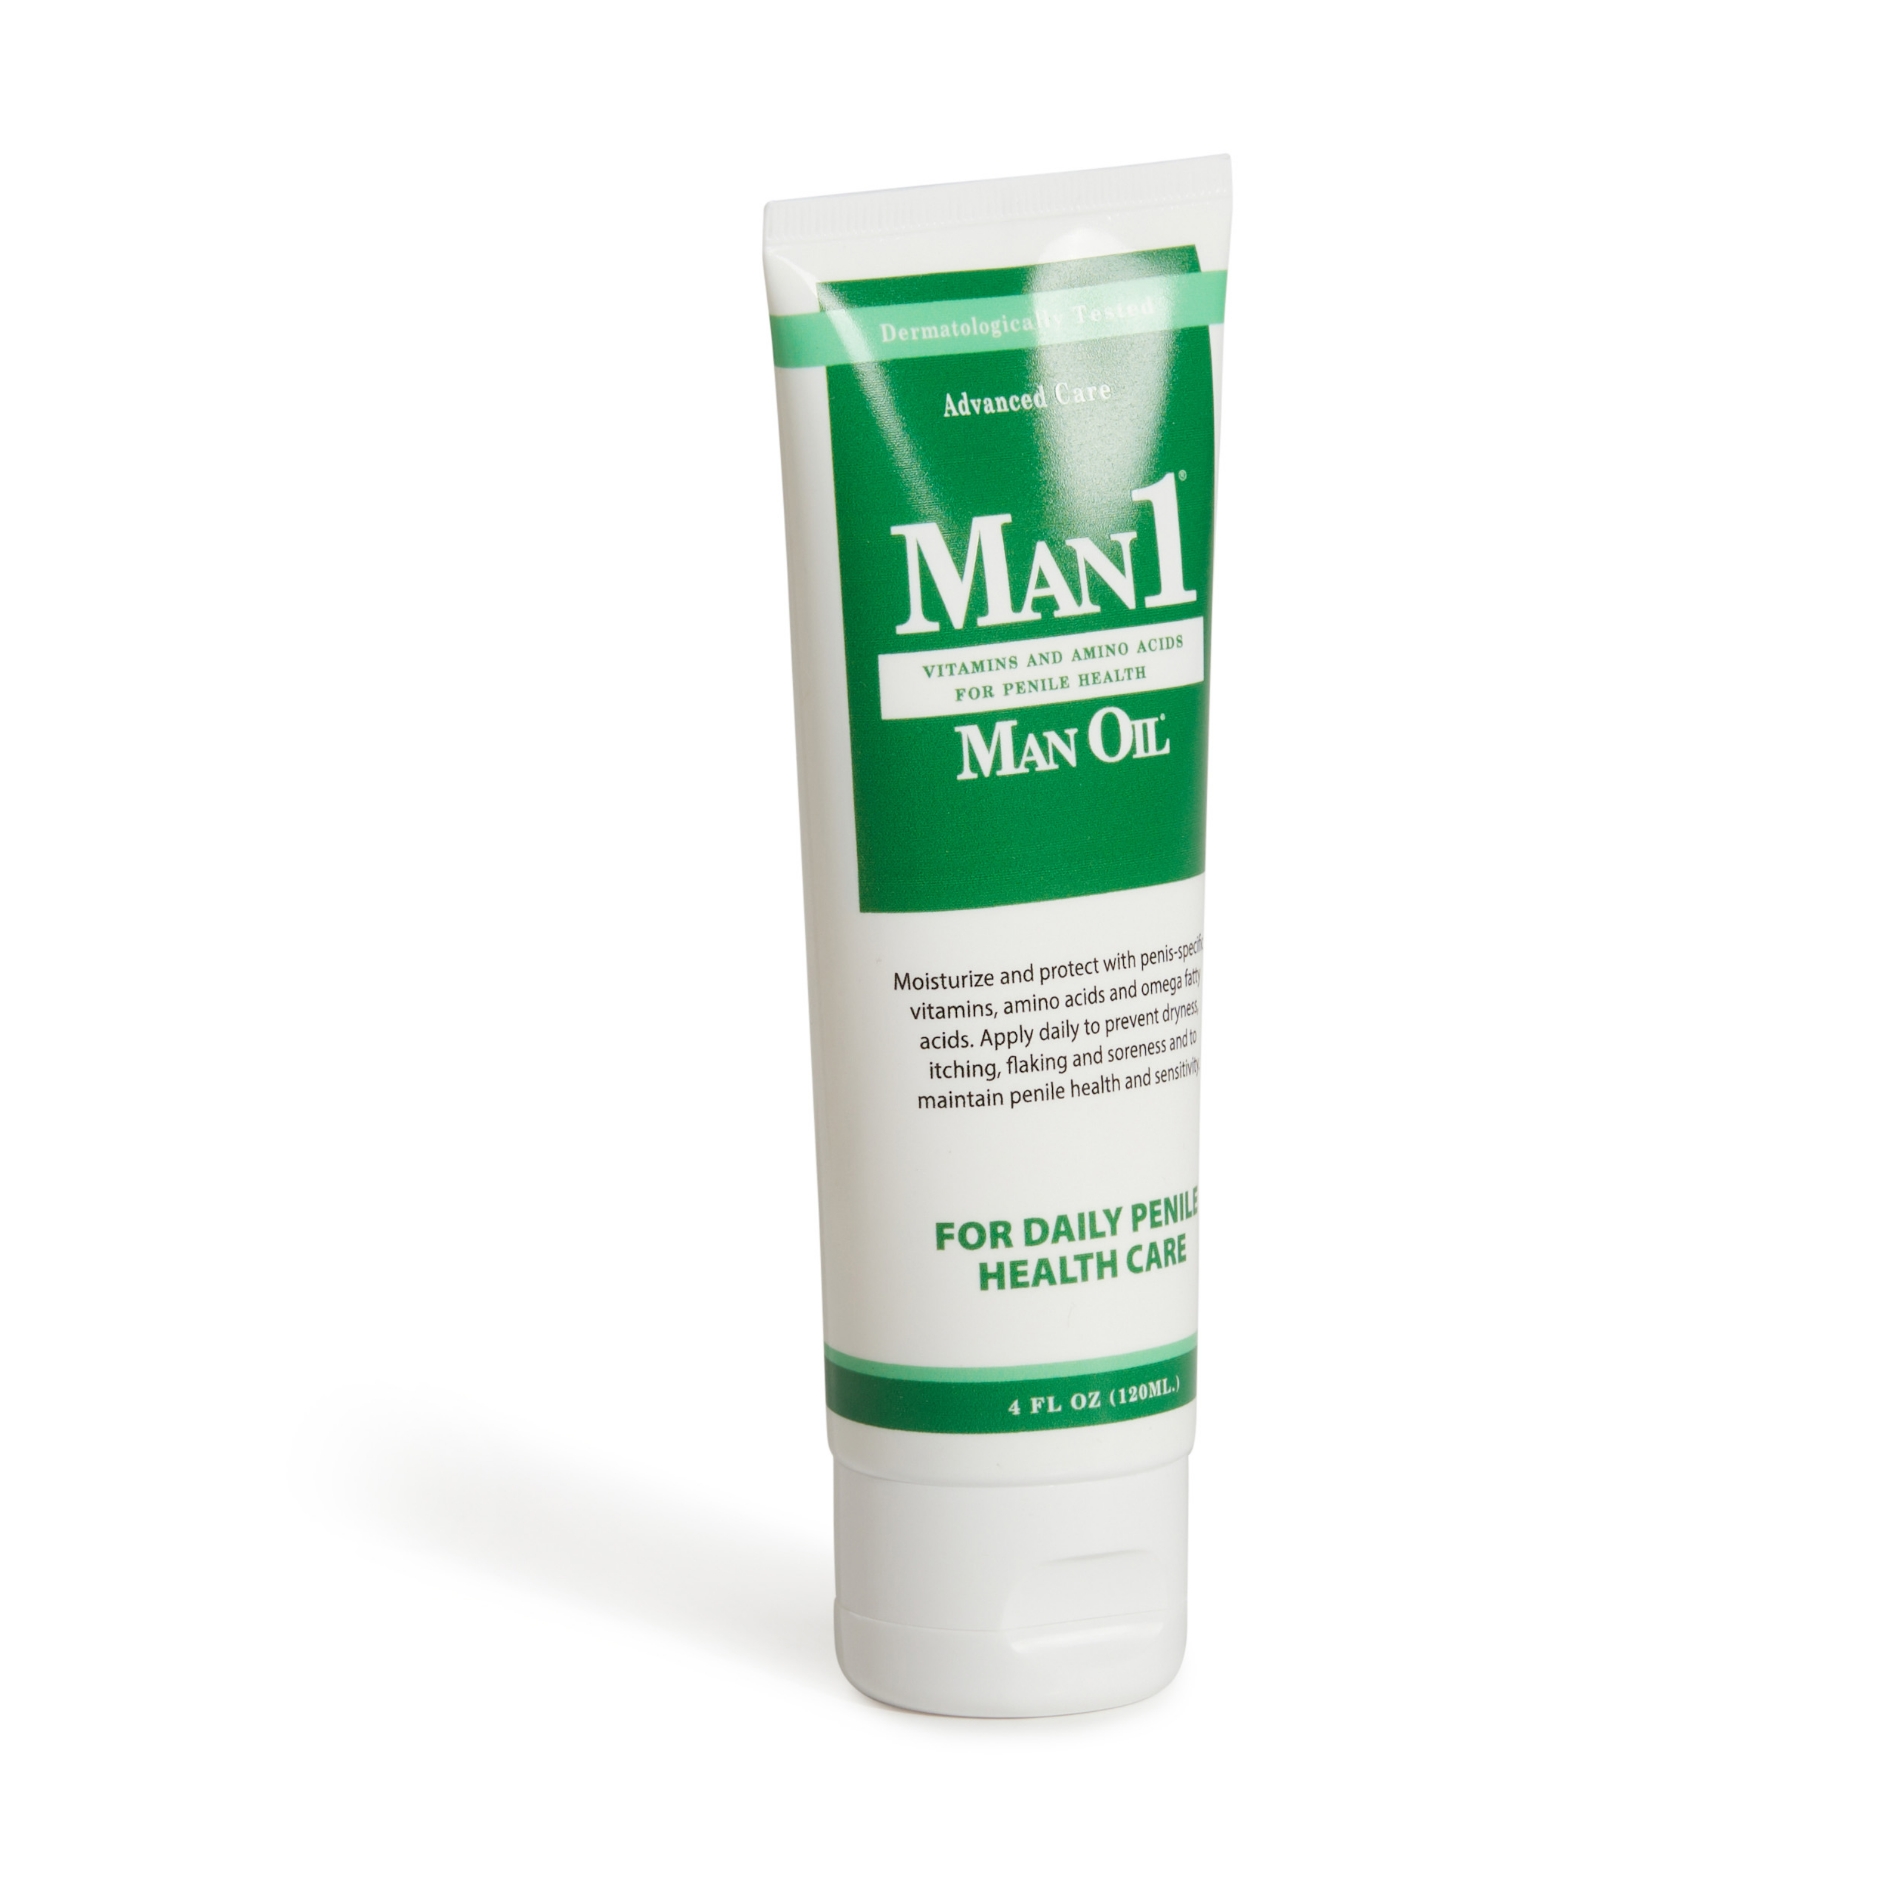 man1 man oil for daily penile health care